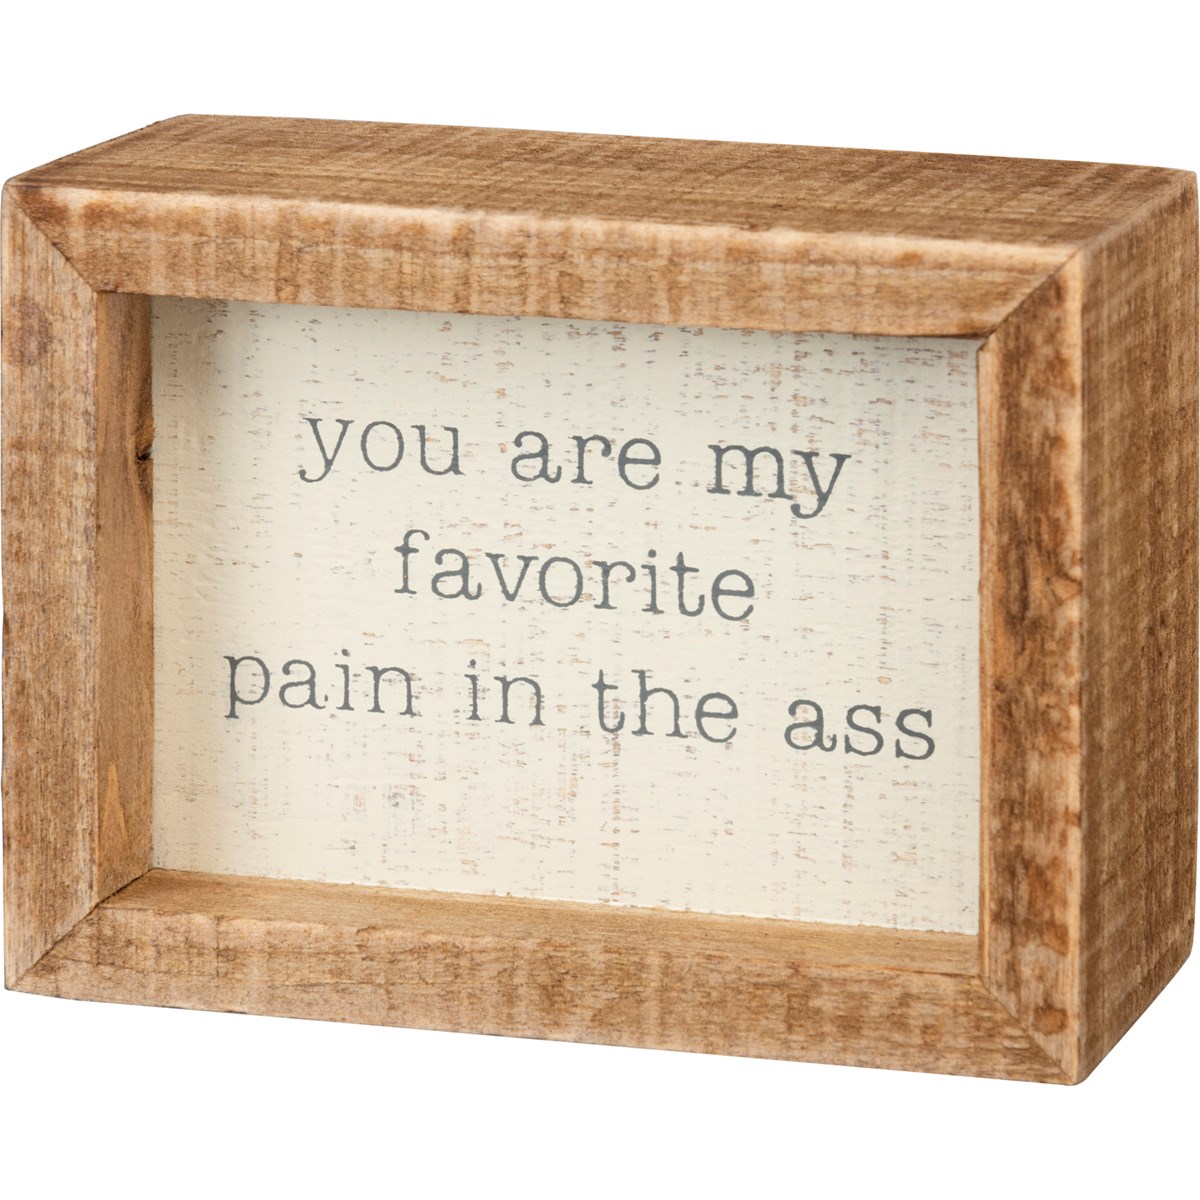 You Are My Favorite Inset Box Sign - Wood